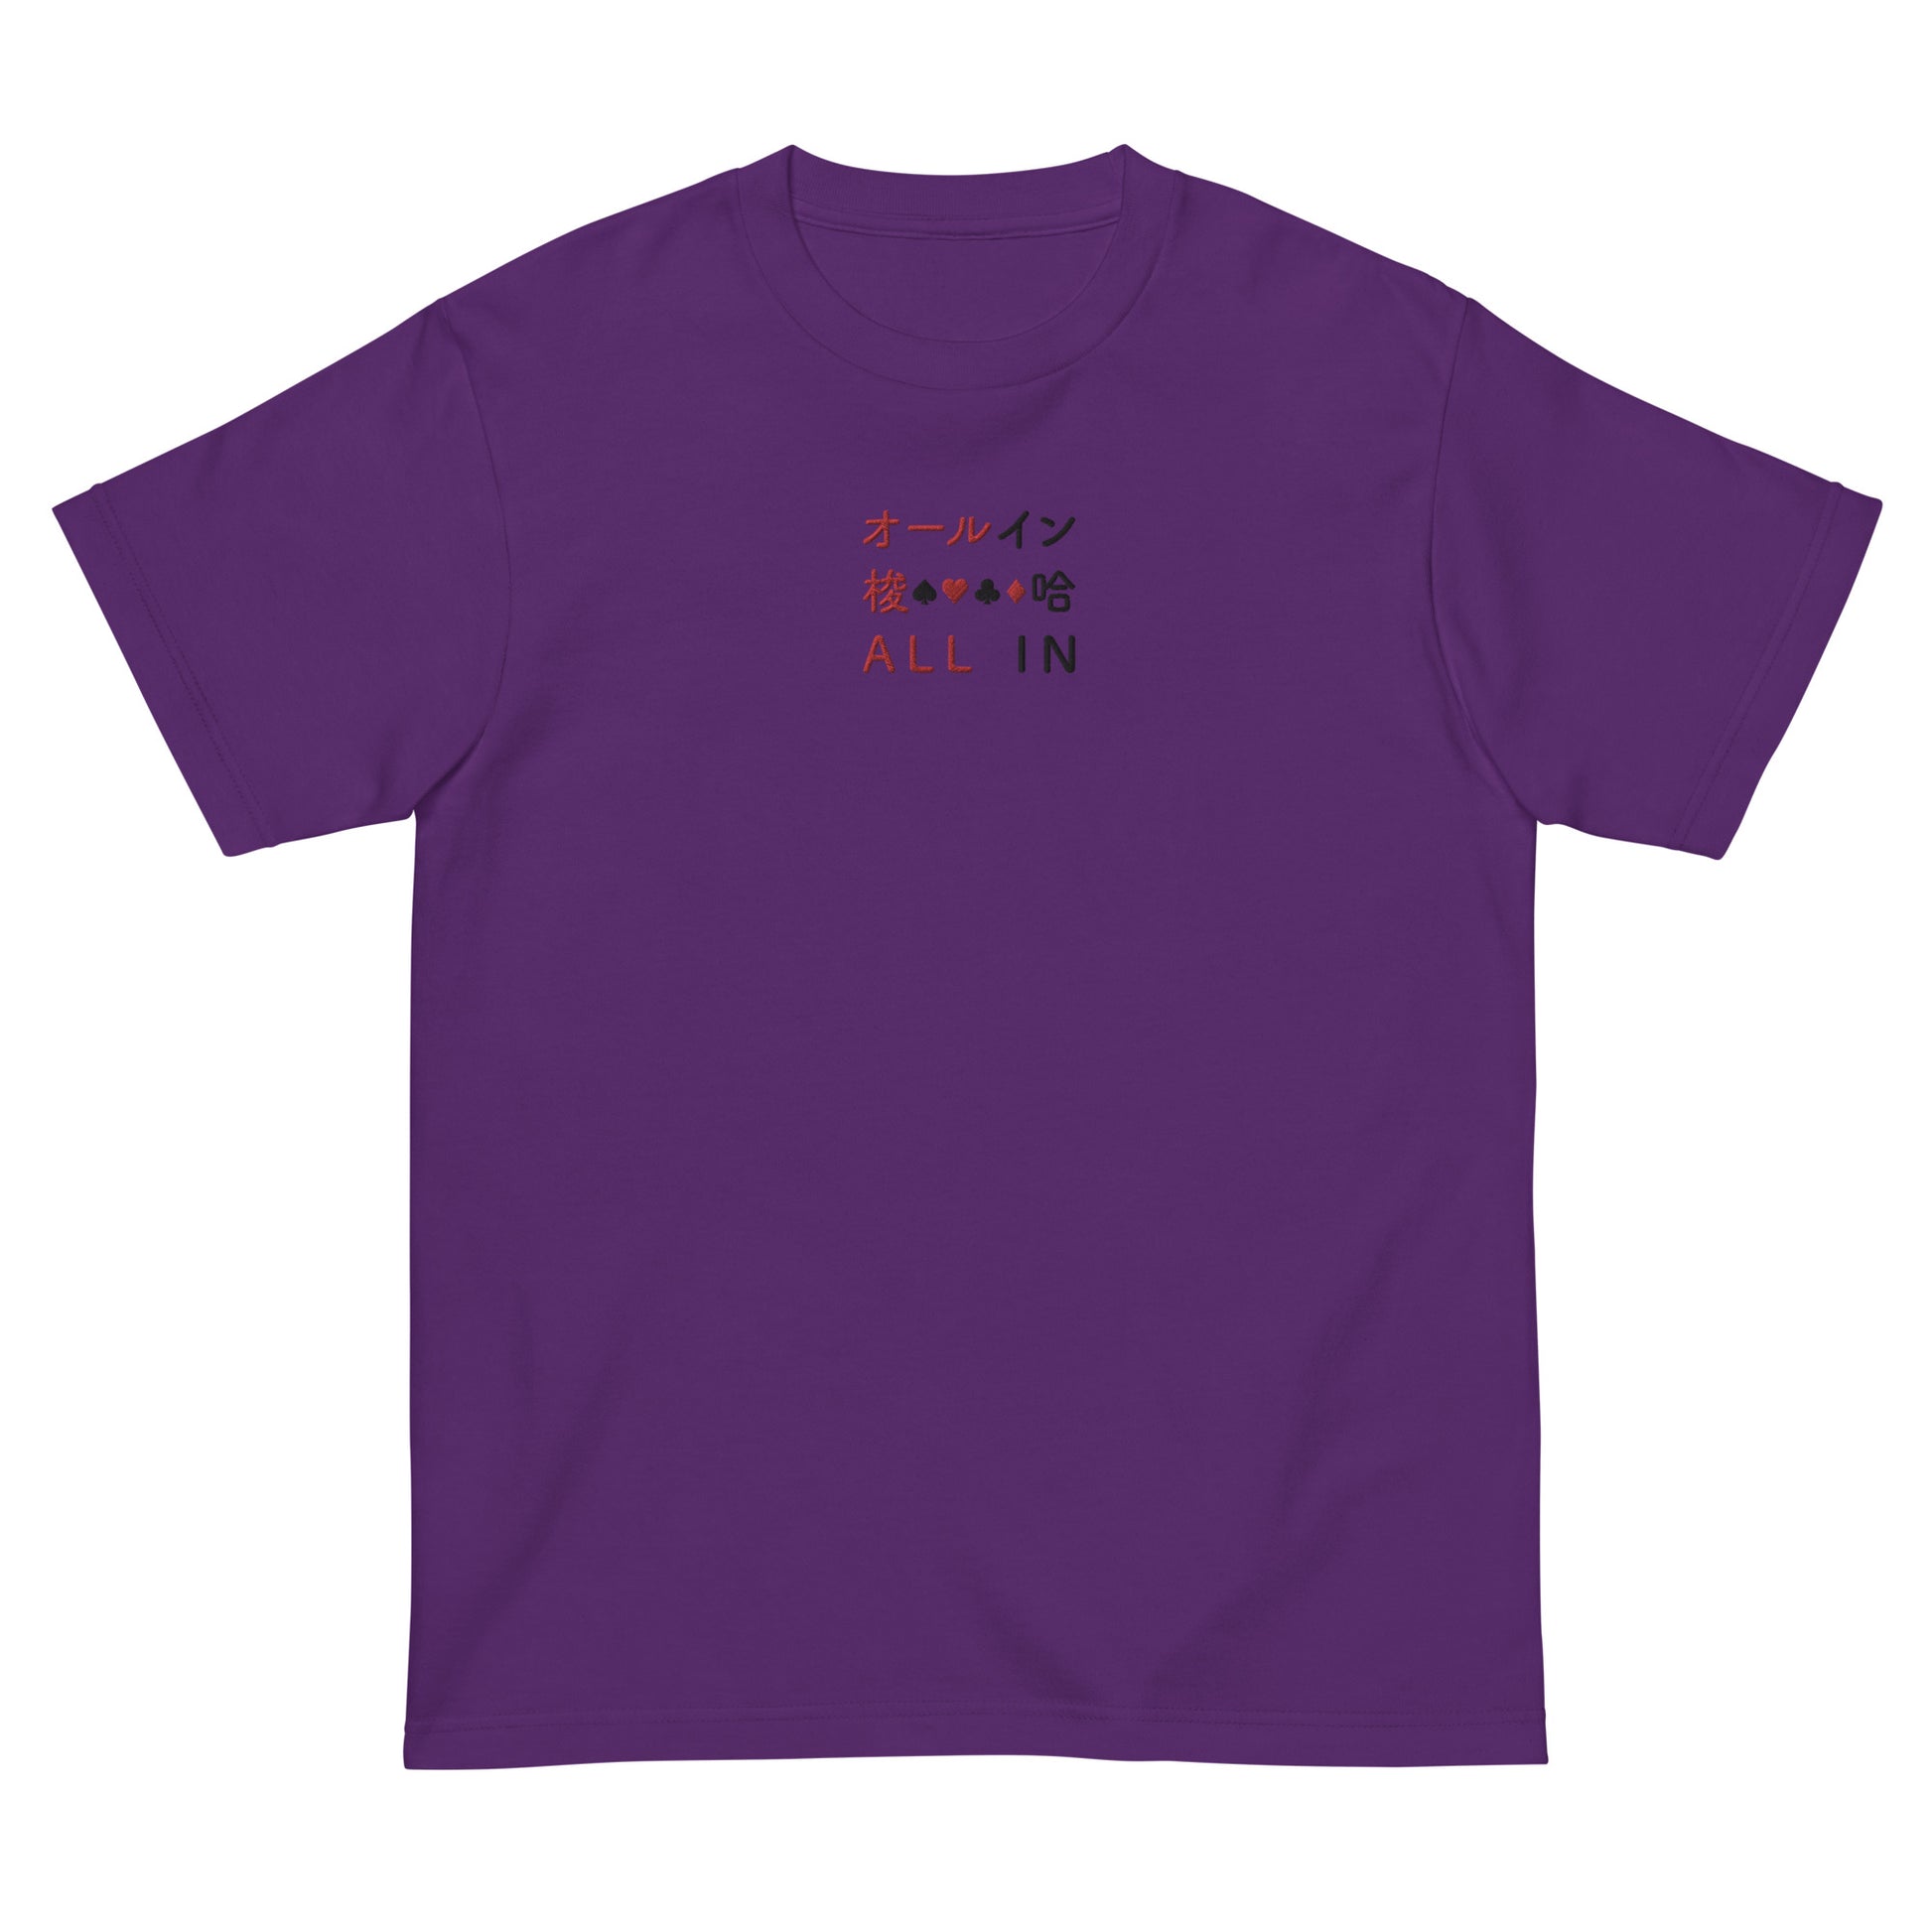 Purple High Quality Tee - Front Design with an Red, Black Embroidery "All IN" in Japanese,Chinese and English